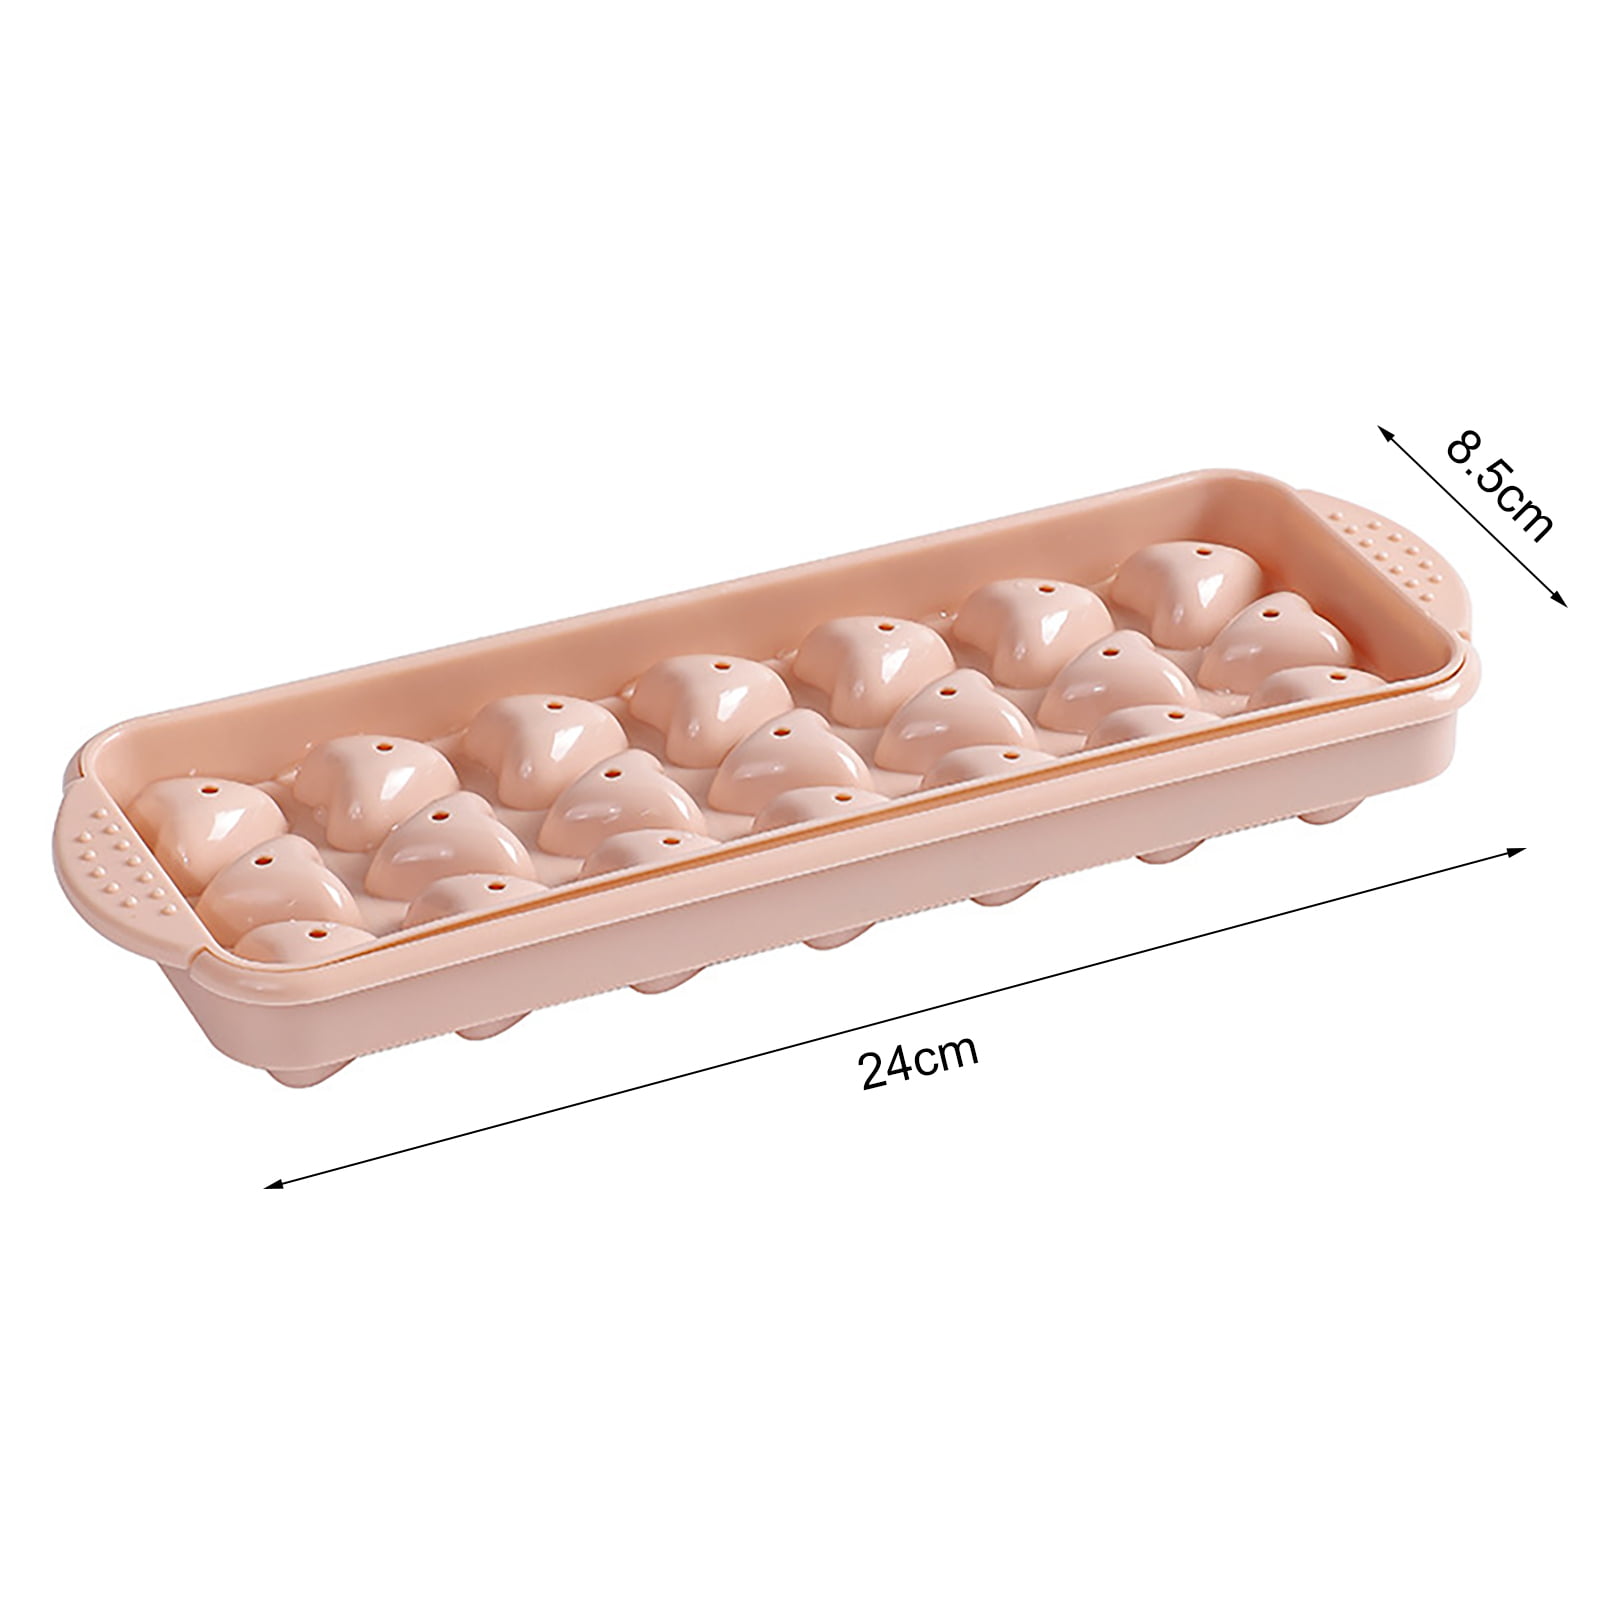 Details about   Mold Storage Containers Honeycomb Shape Cube Tray Silicone Container No Spill 